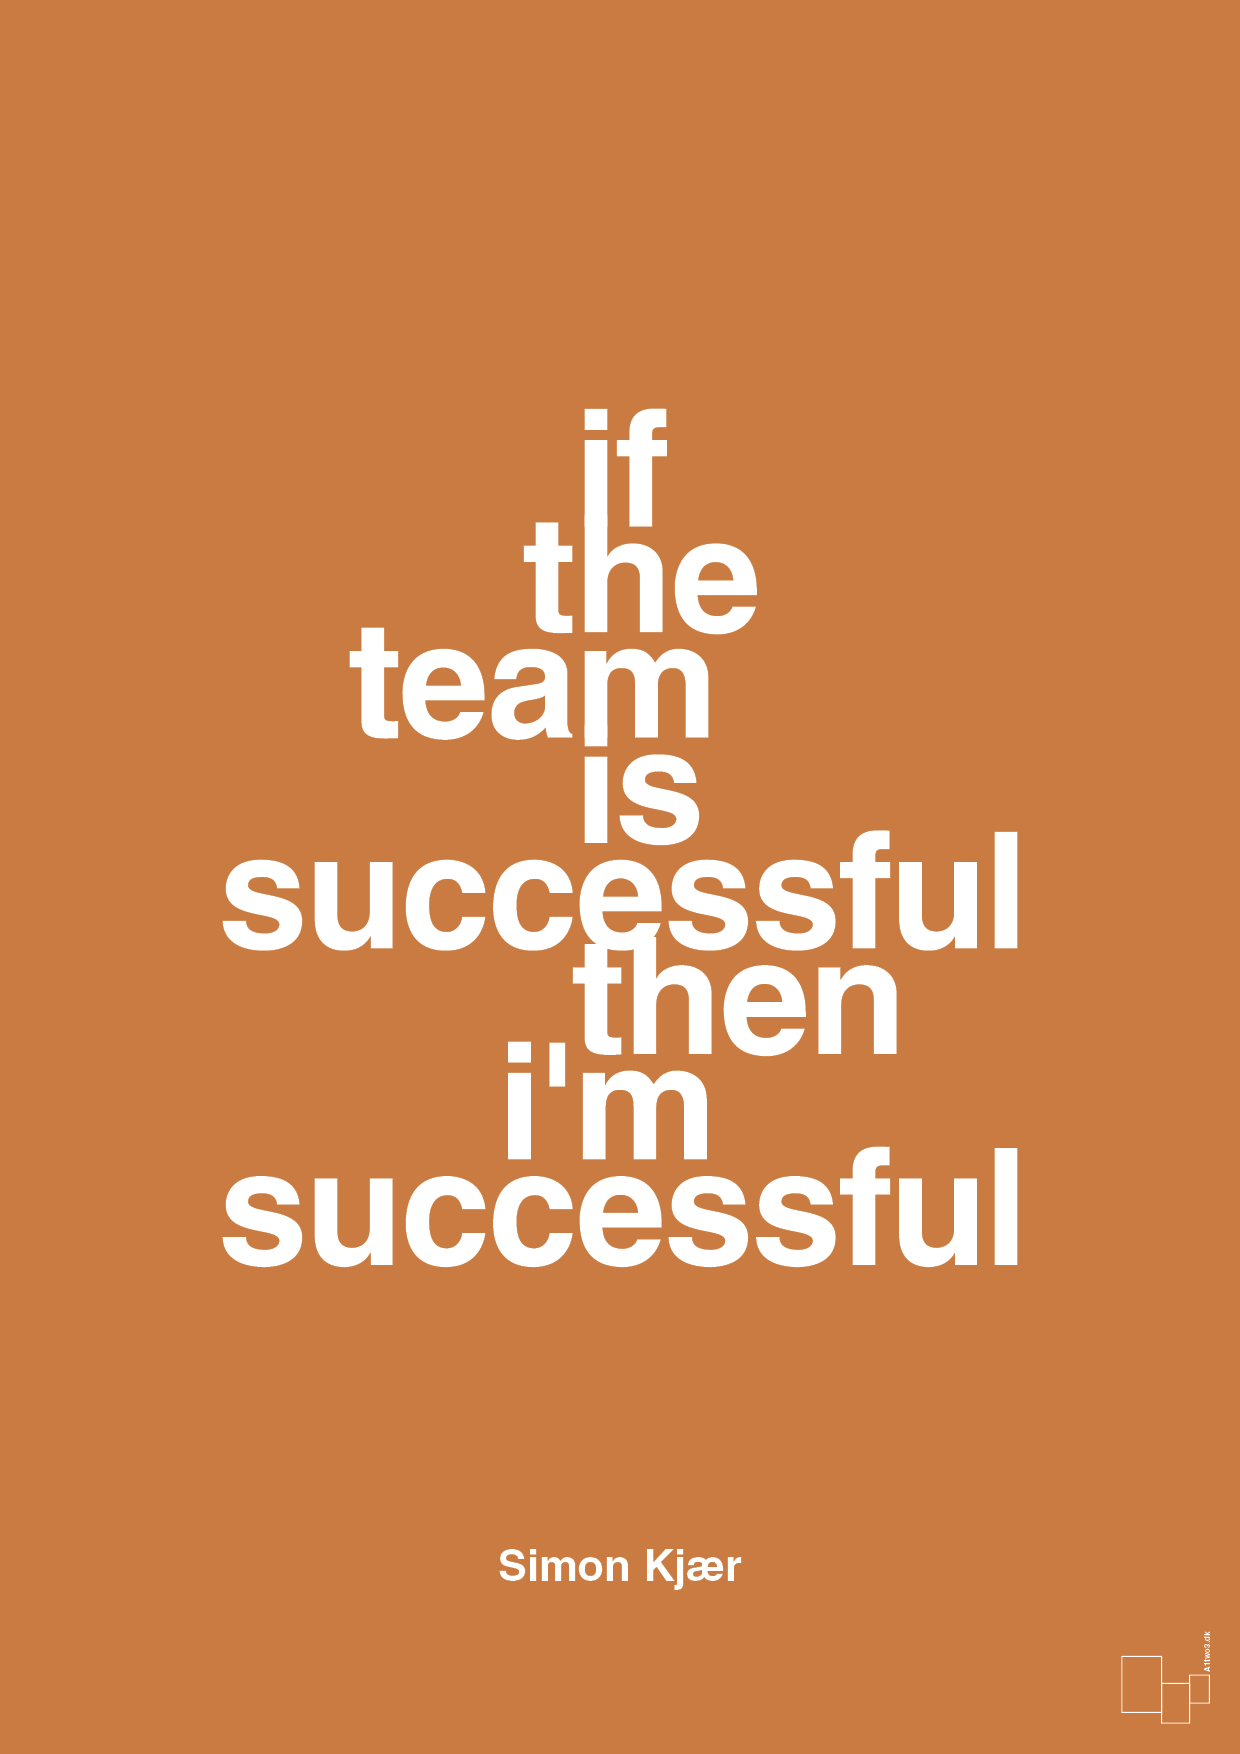 if the team is successful then i'm successful - Plakat med Citater i Rumba Orange